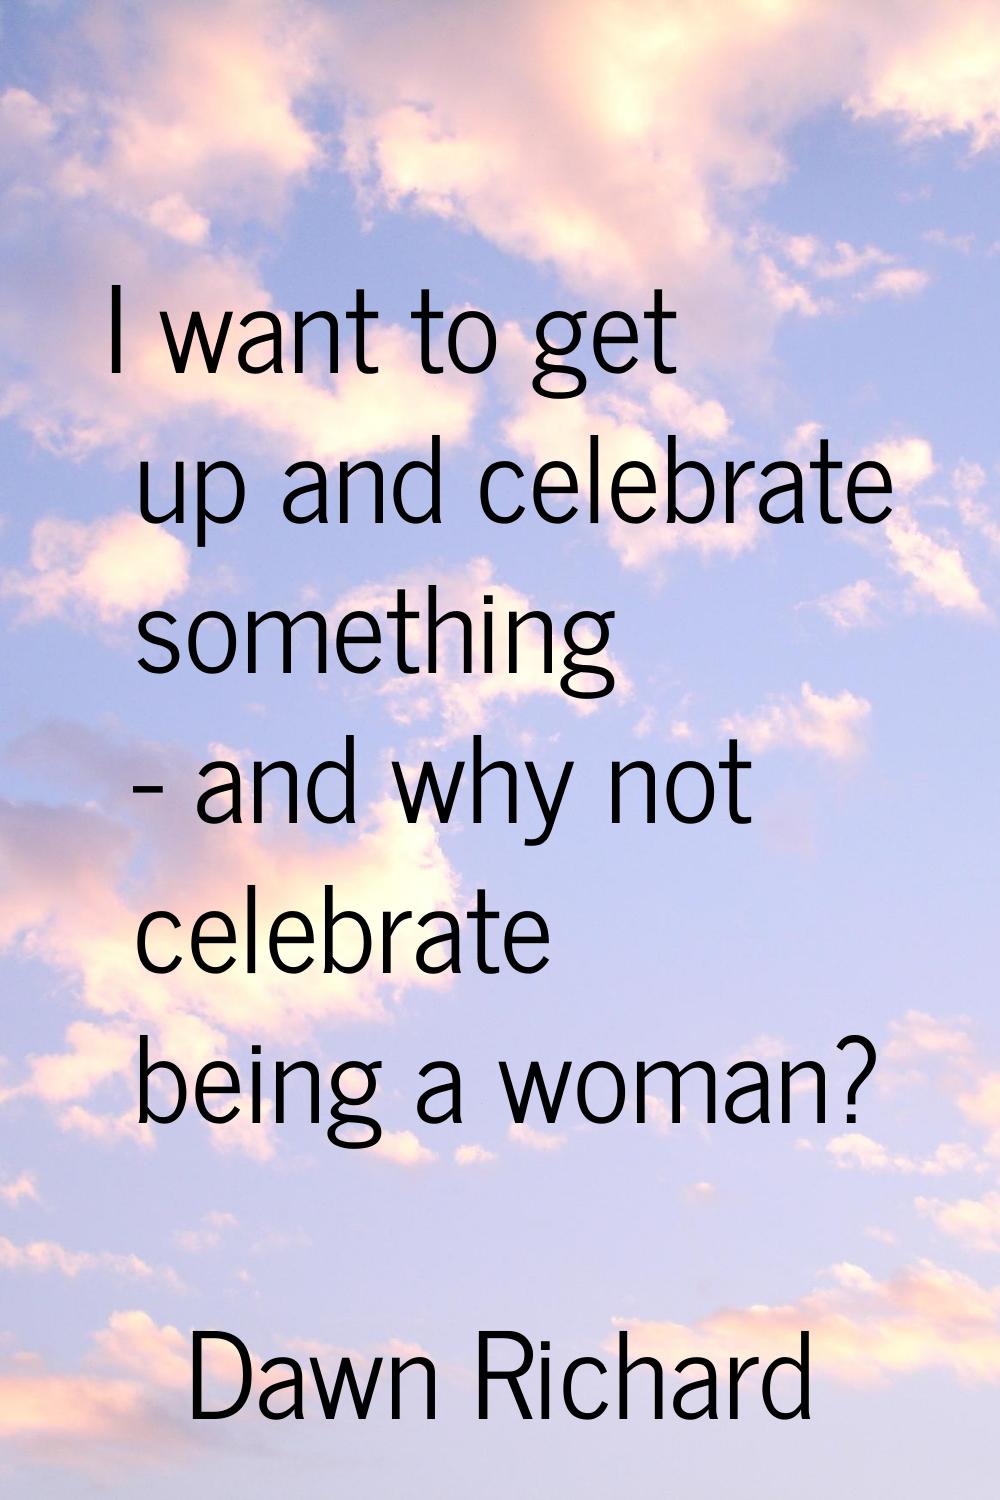 I want to get up and celebrate something - and why not celebrate being a woman?